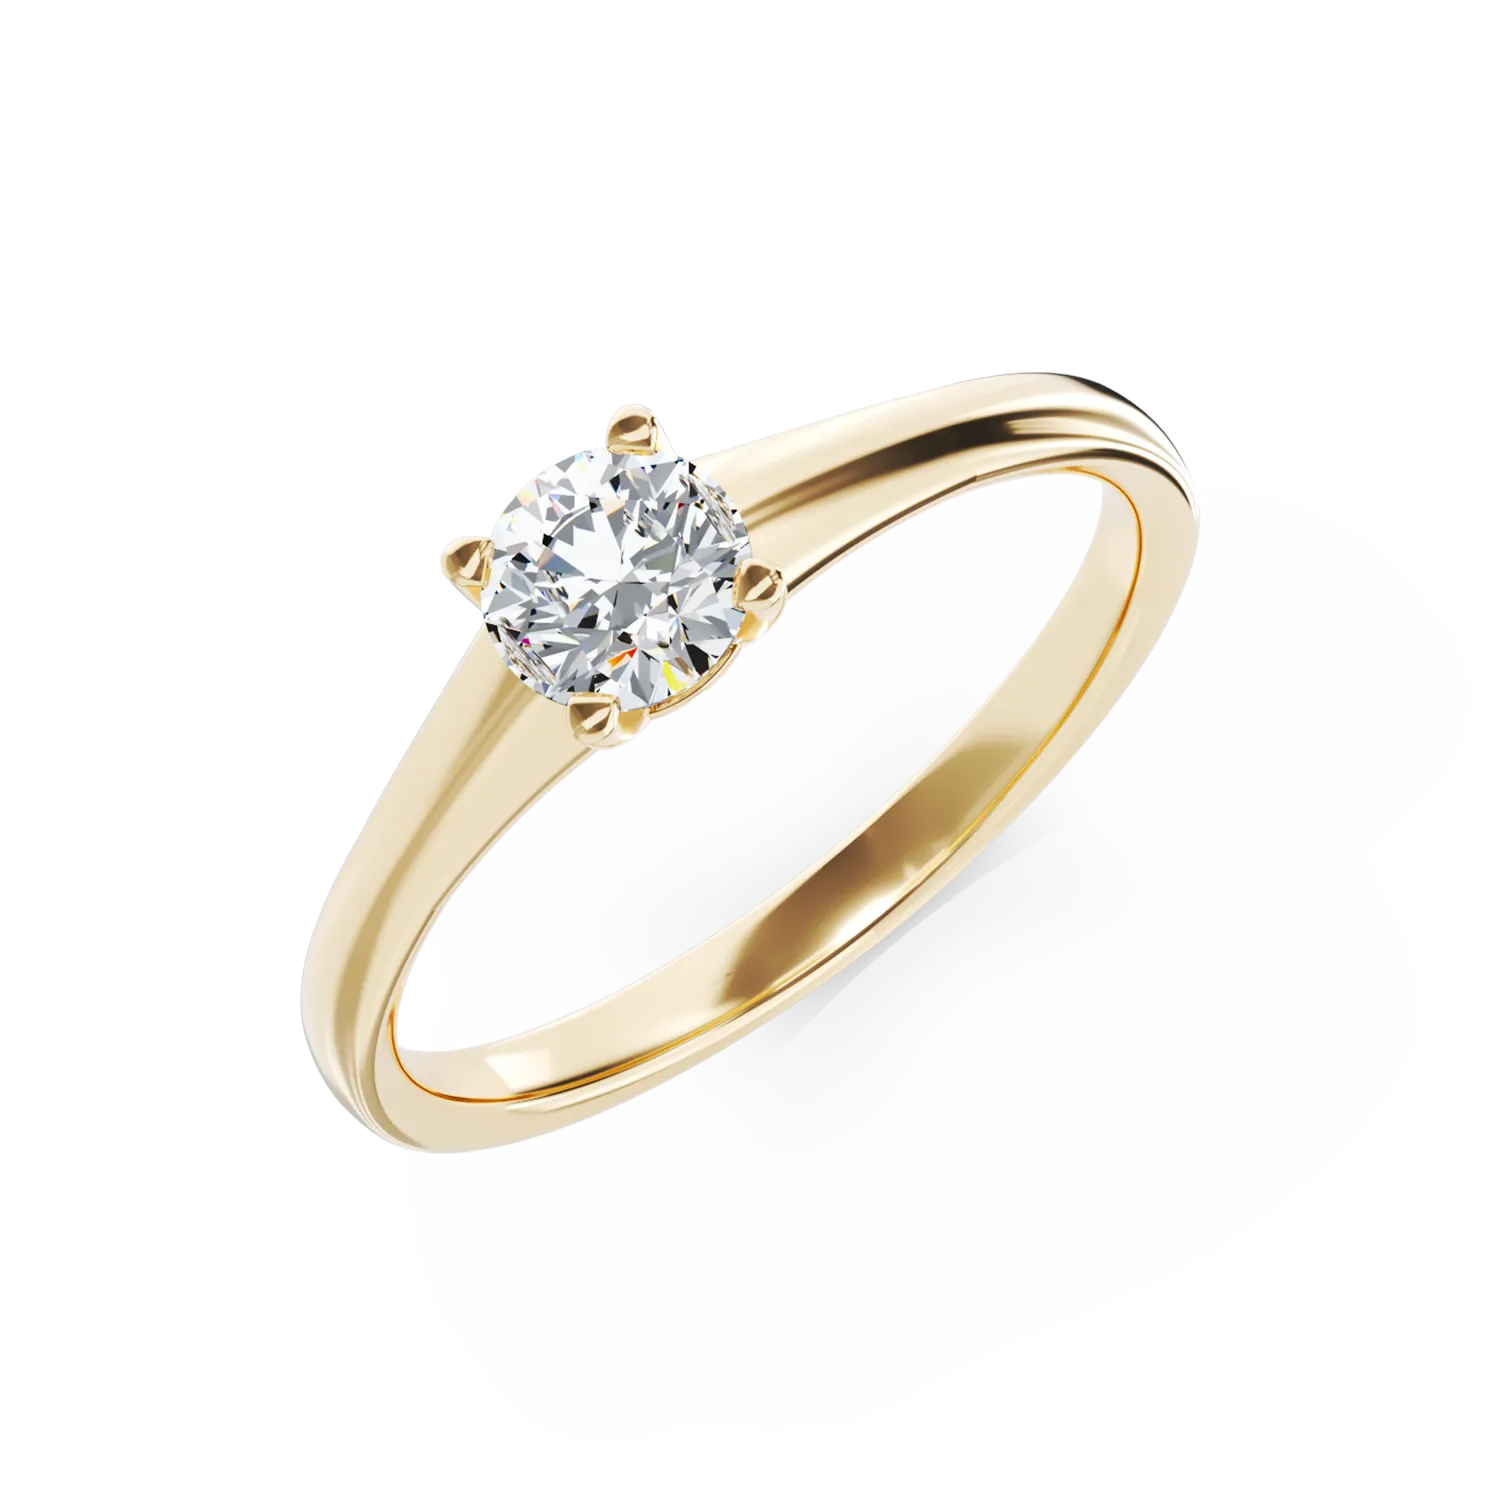 18K yellow gold engagement ring with a 0.4ct solitaire diamond